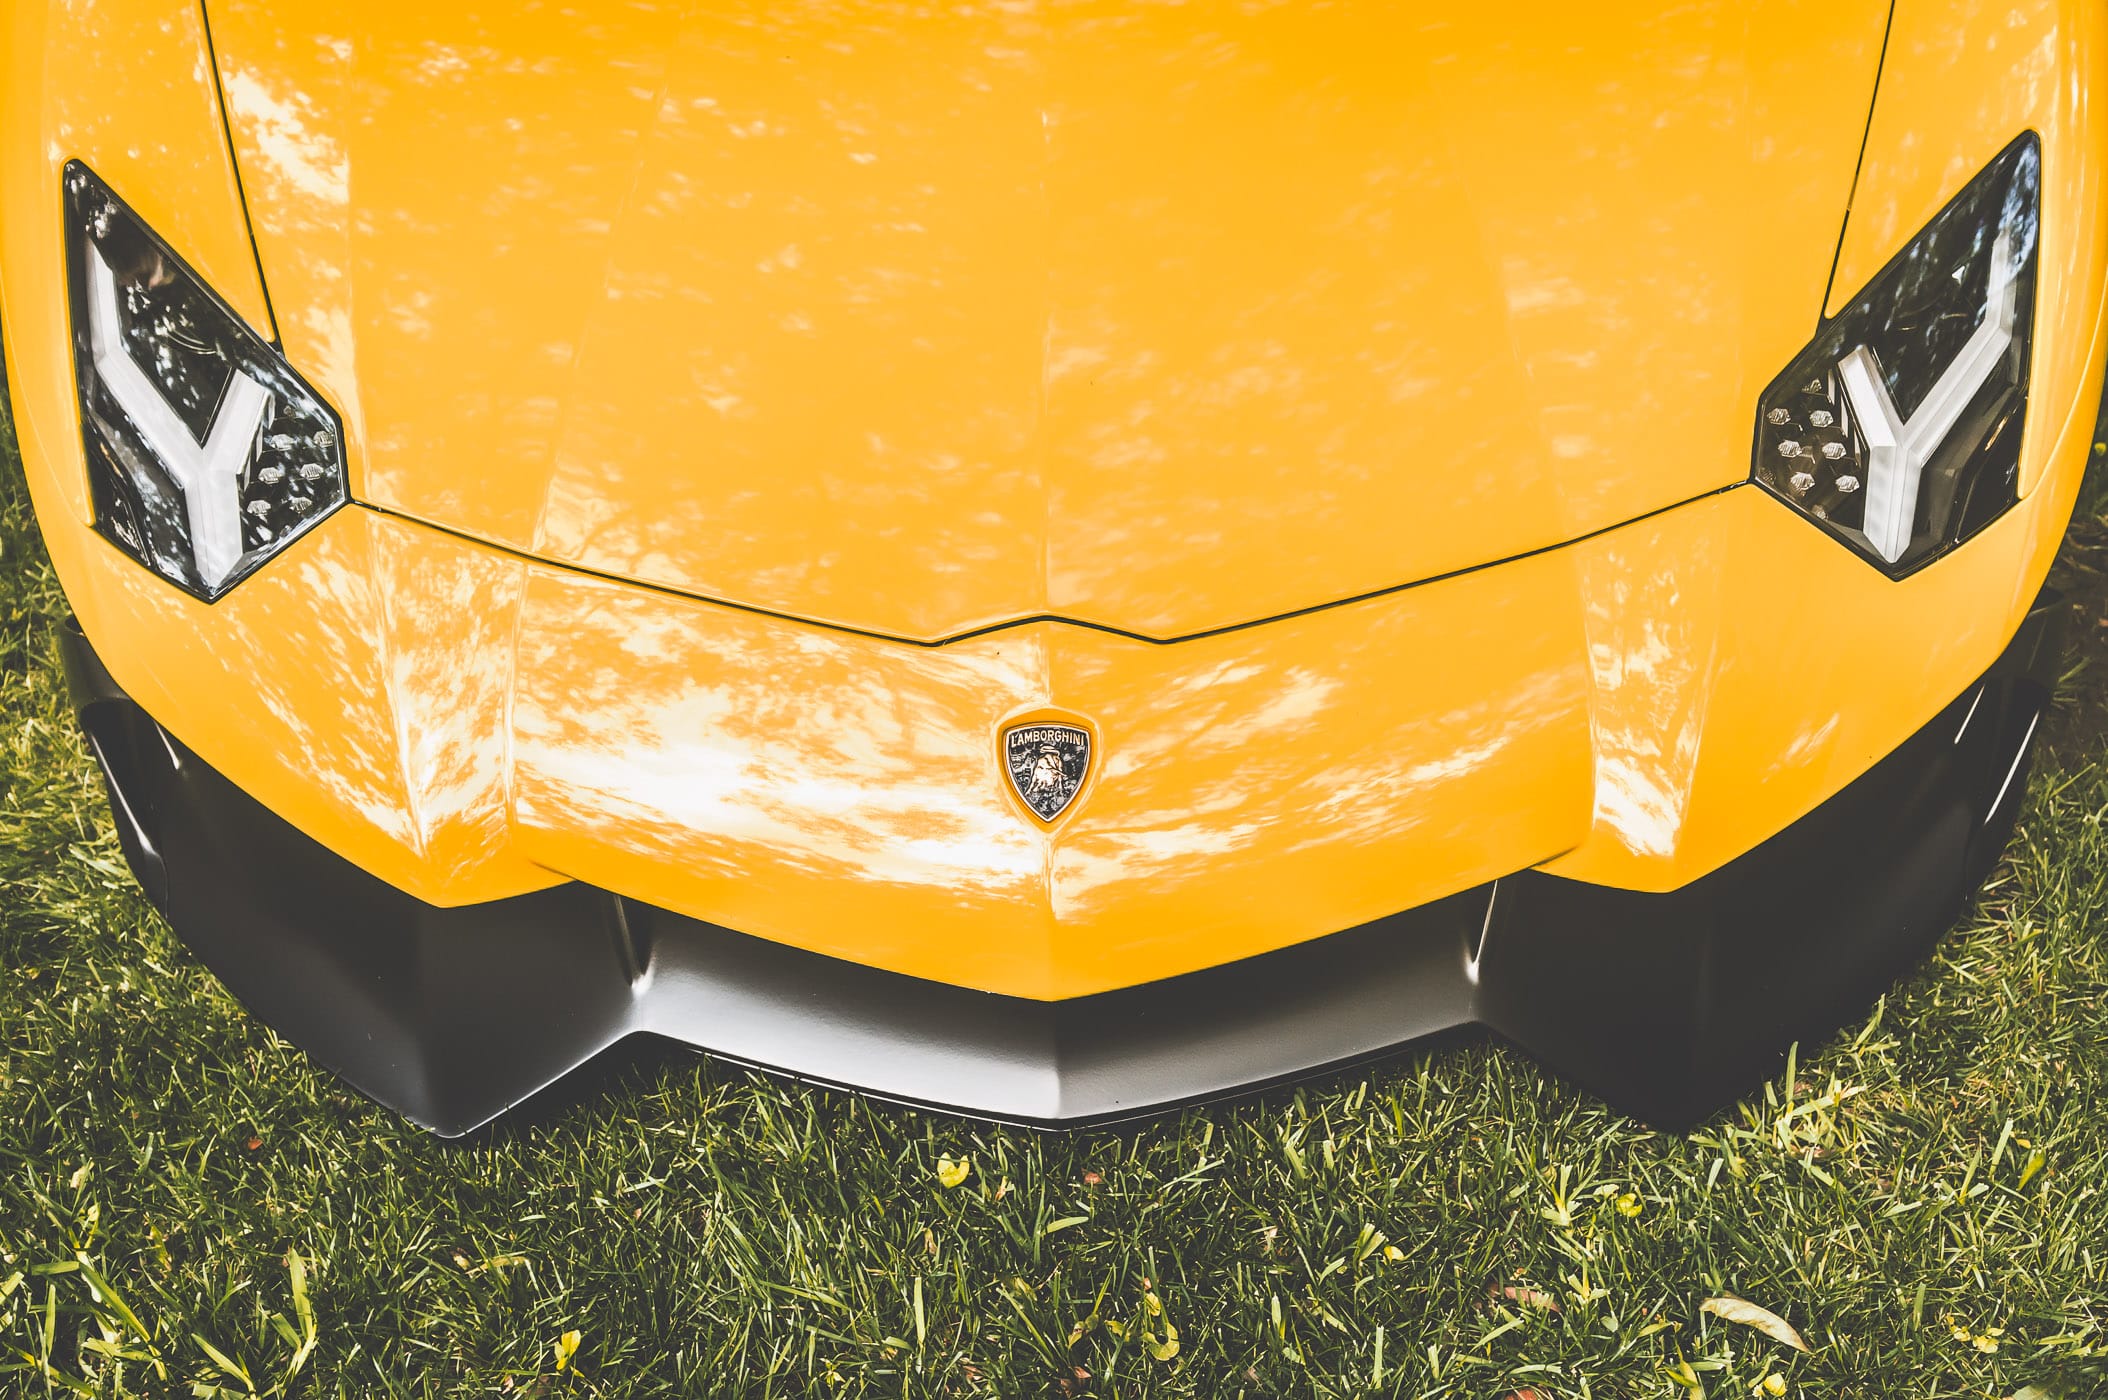 Detail of a Lamborghini Aventador—named for a bull that fought valiantly at the Saragossa, Spain bullring in 1993—at the Cars in the Park event at Dallas' Cooper Aerobics Center.